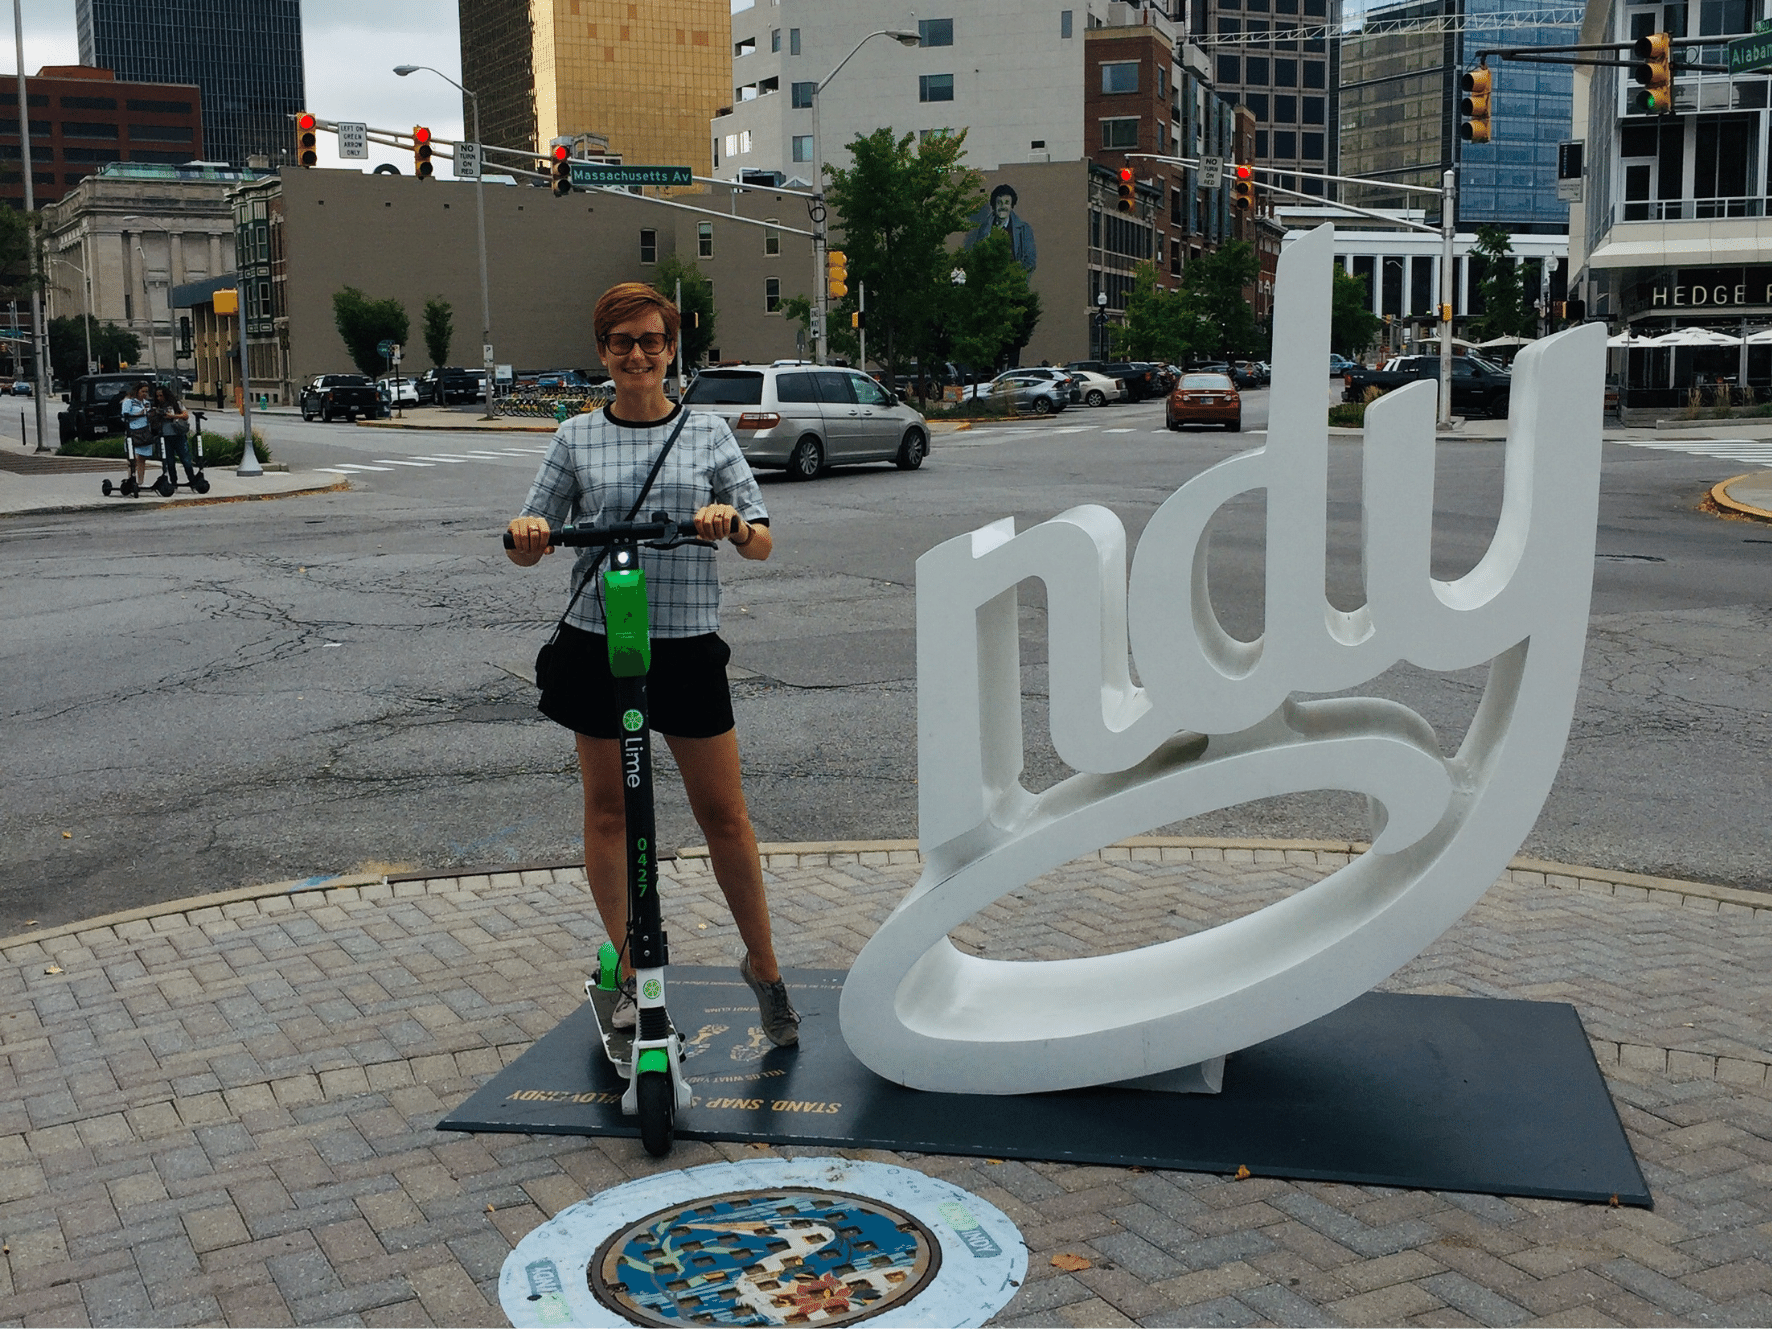 Me standing on a kick-style electric scooter and posing as the "I" in the "Indy" tourism sign in Indiannapolis